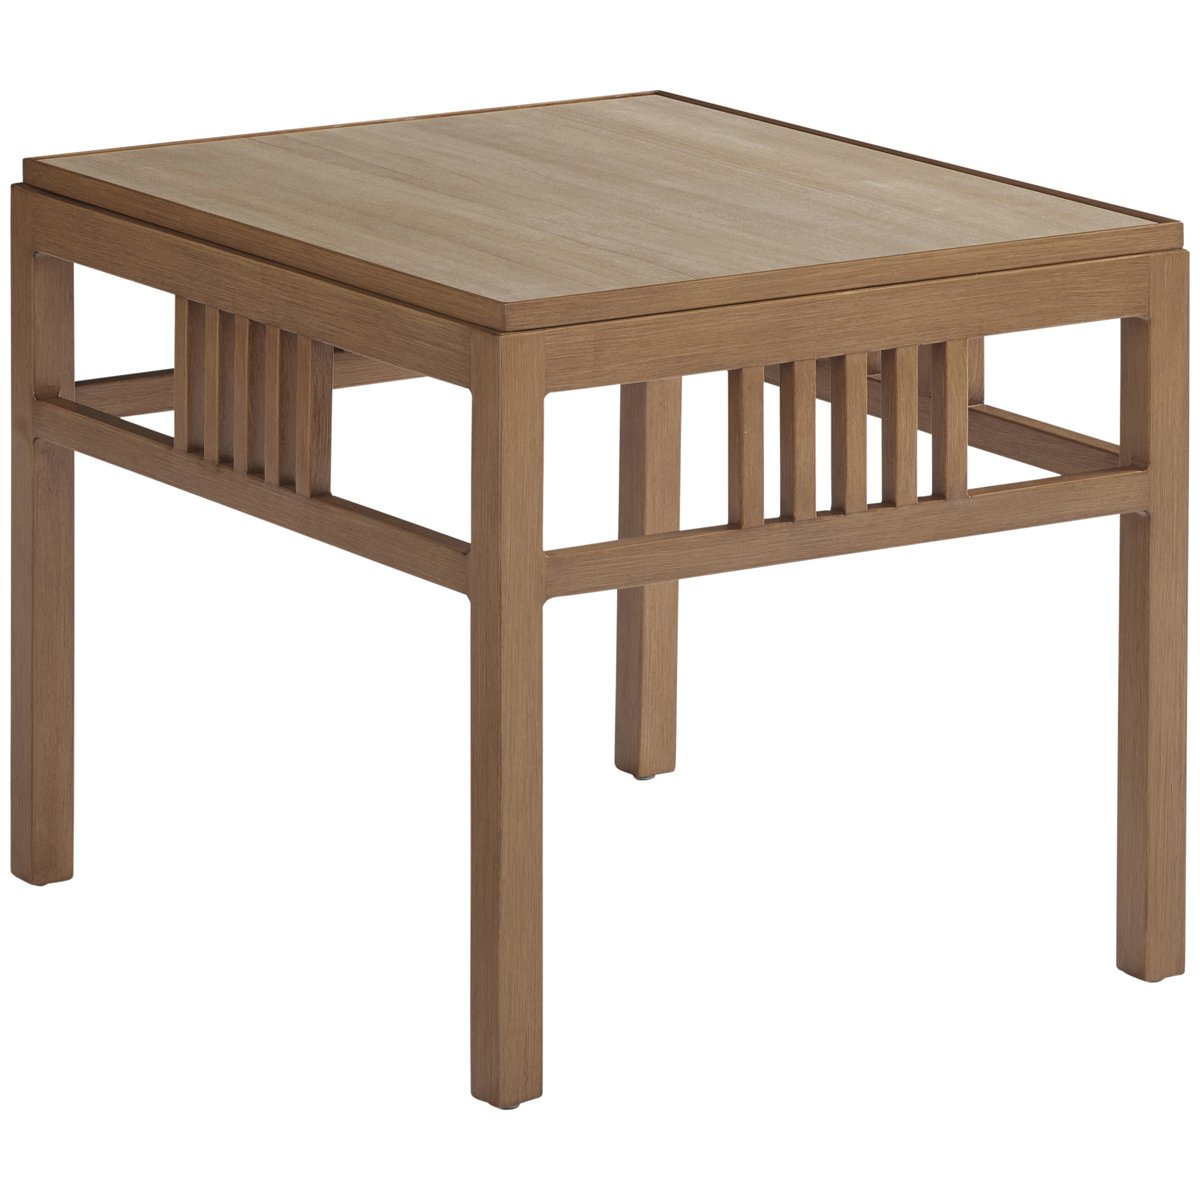 Tommy Bahama St Tropez Rectangular Outdoor End Table